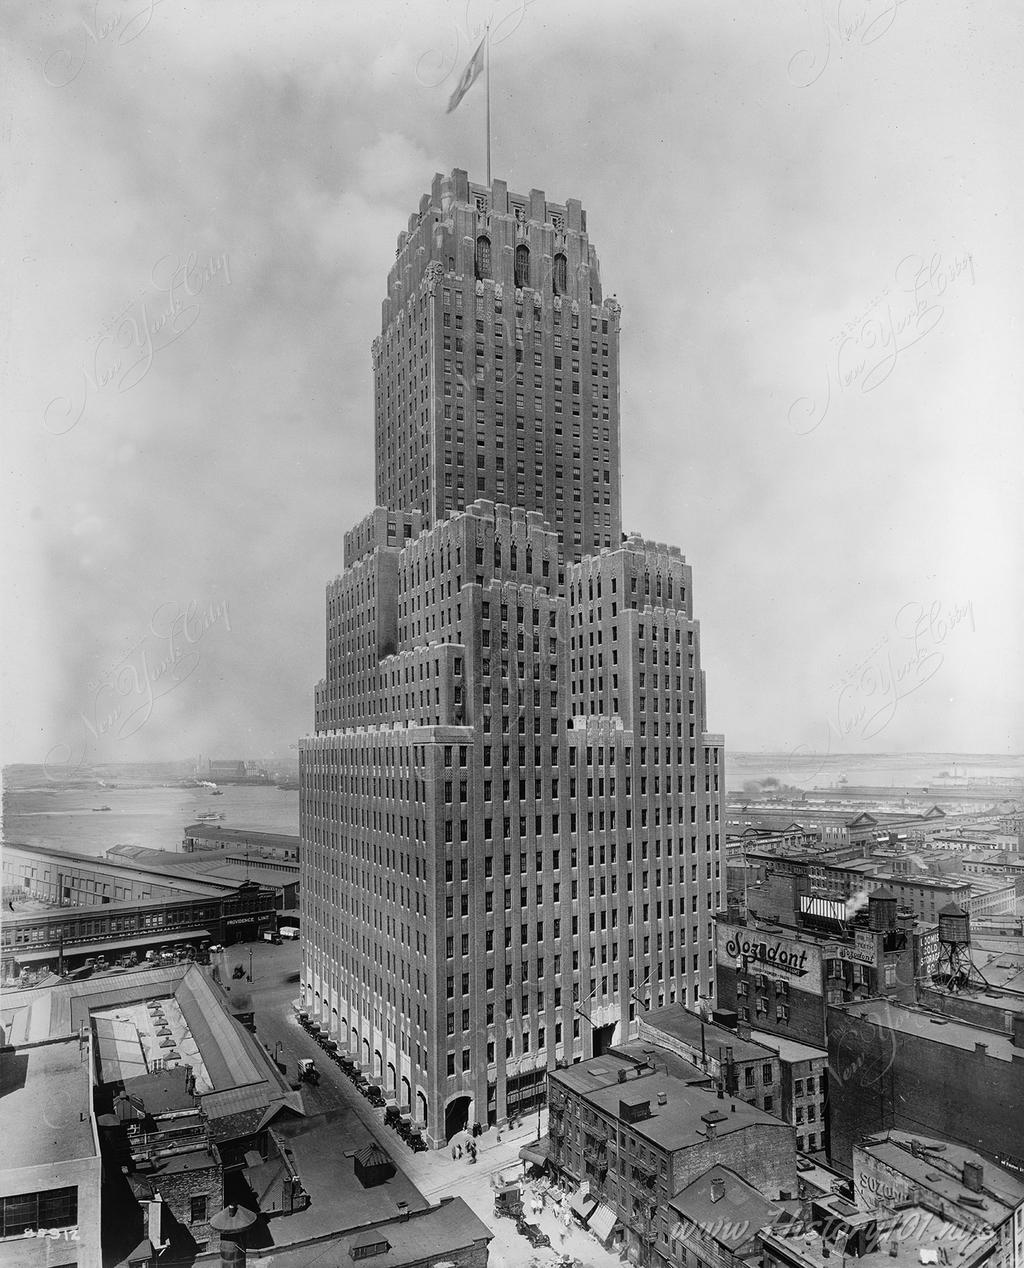 A photograph showing the New York Telephone Company Building, Barclay and Vesey Streets.